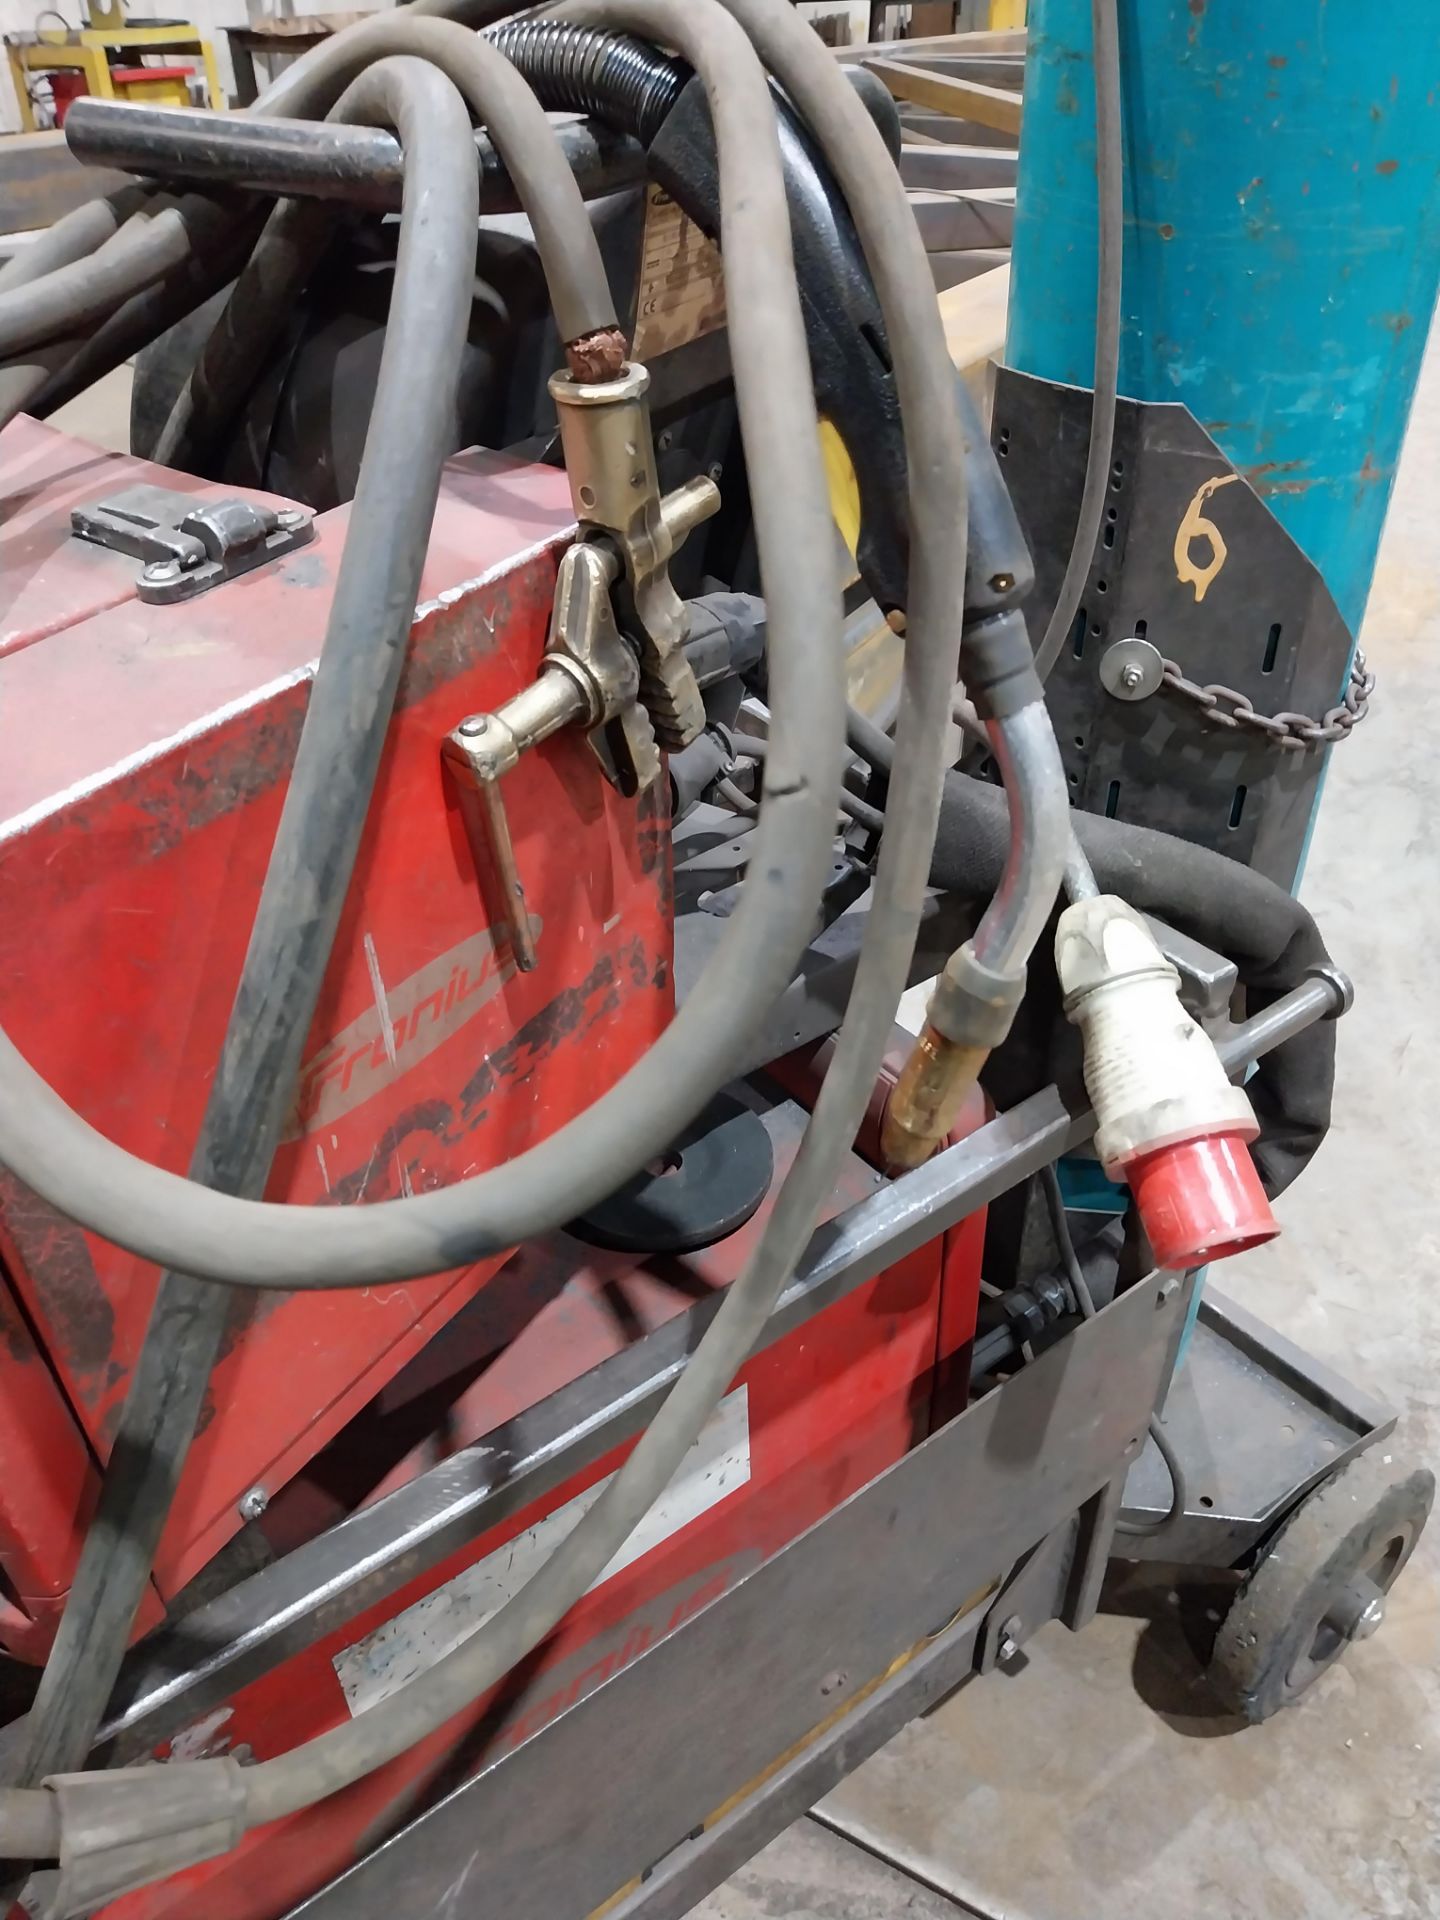 Fronius TransSynergic 4000 mig welder with VR4000 wire feed, clamp and torch (bottle not included) - Image 5 of 6